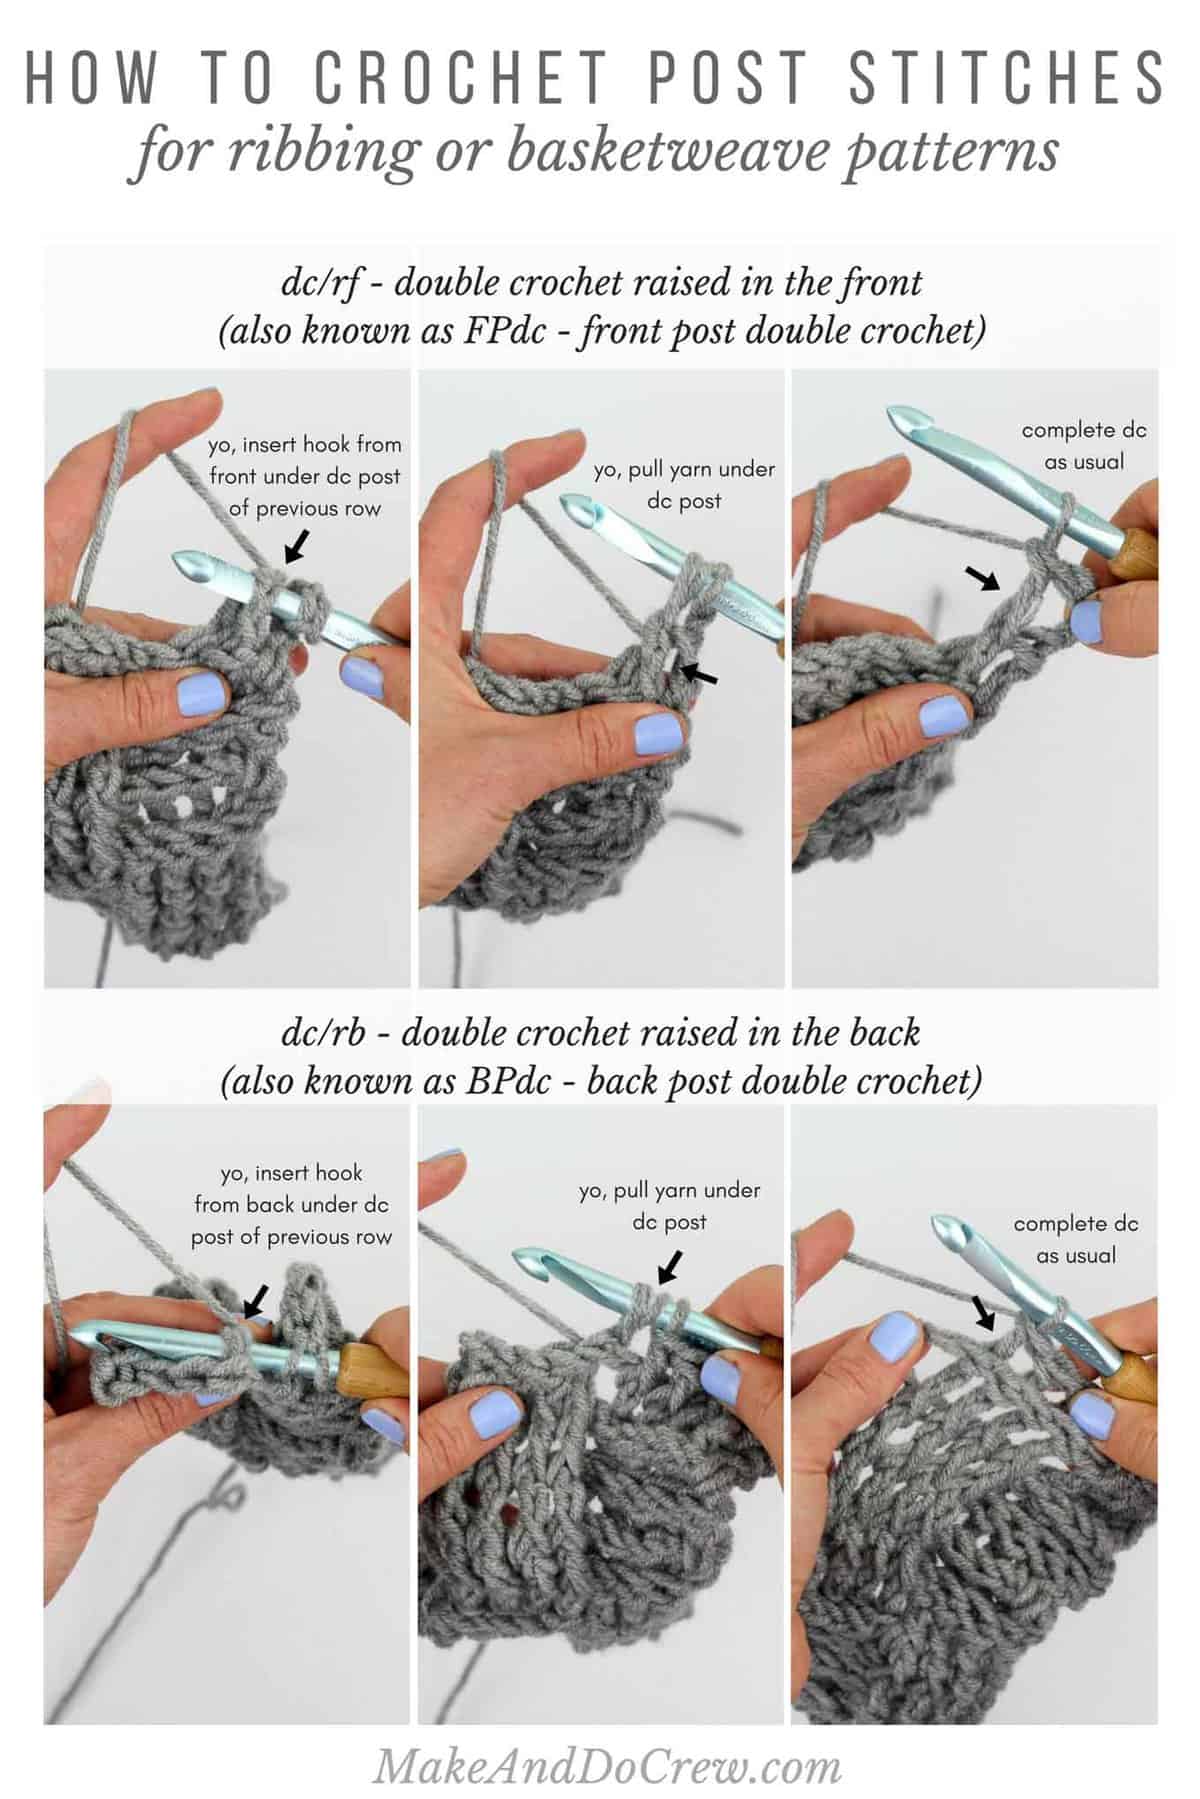 Learn how to crochet post stitches (FPdc and BPdc) in the easy video tutorial. These post stitches are the foundation skills for the crochet basket weave stitch.